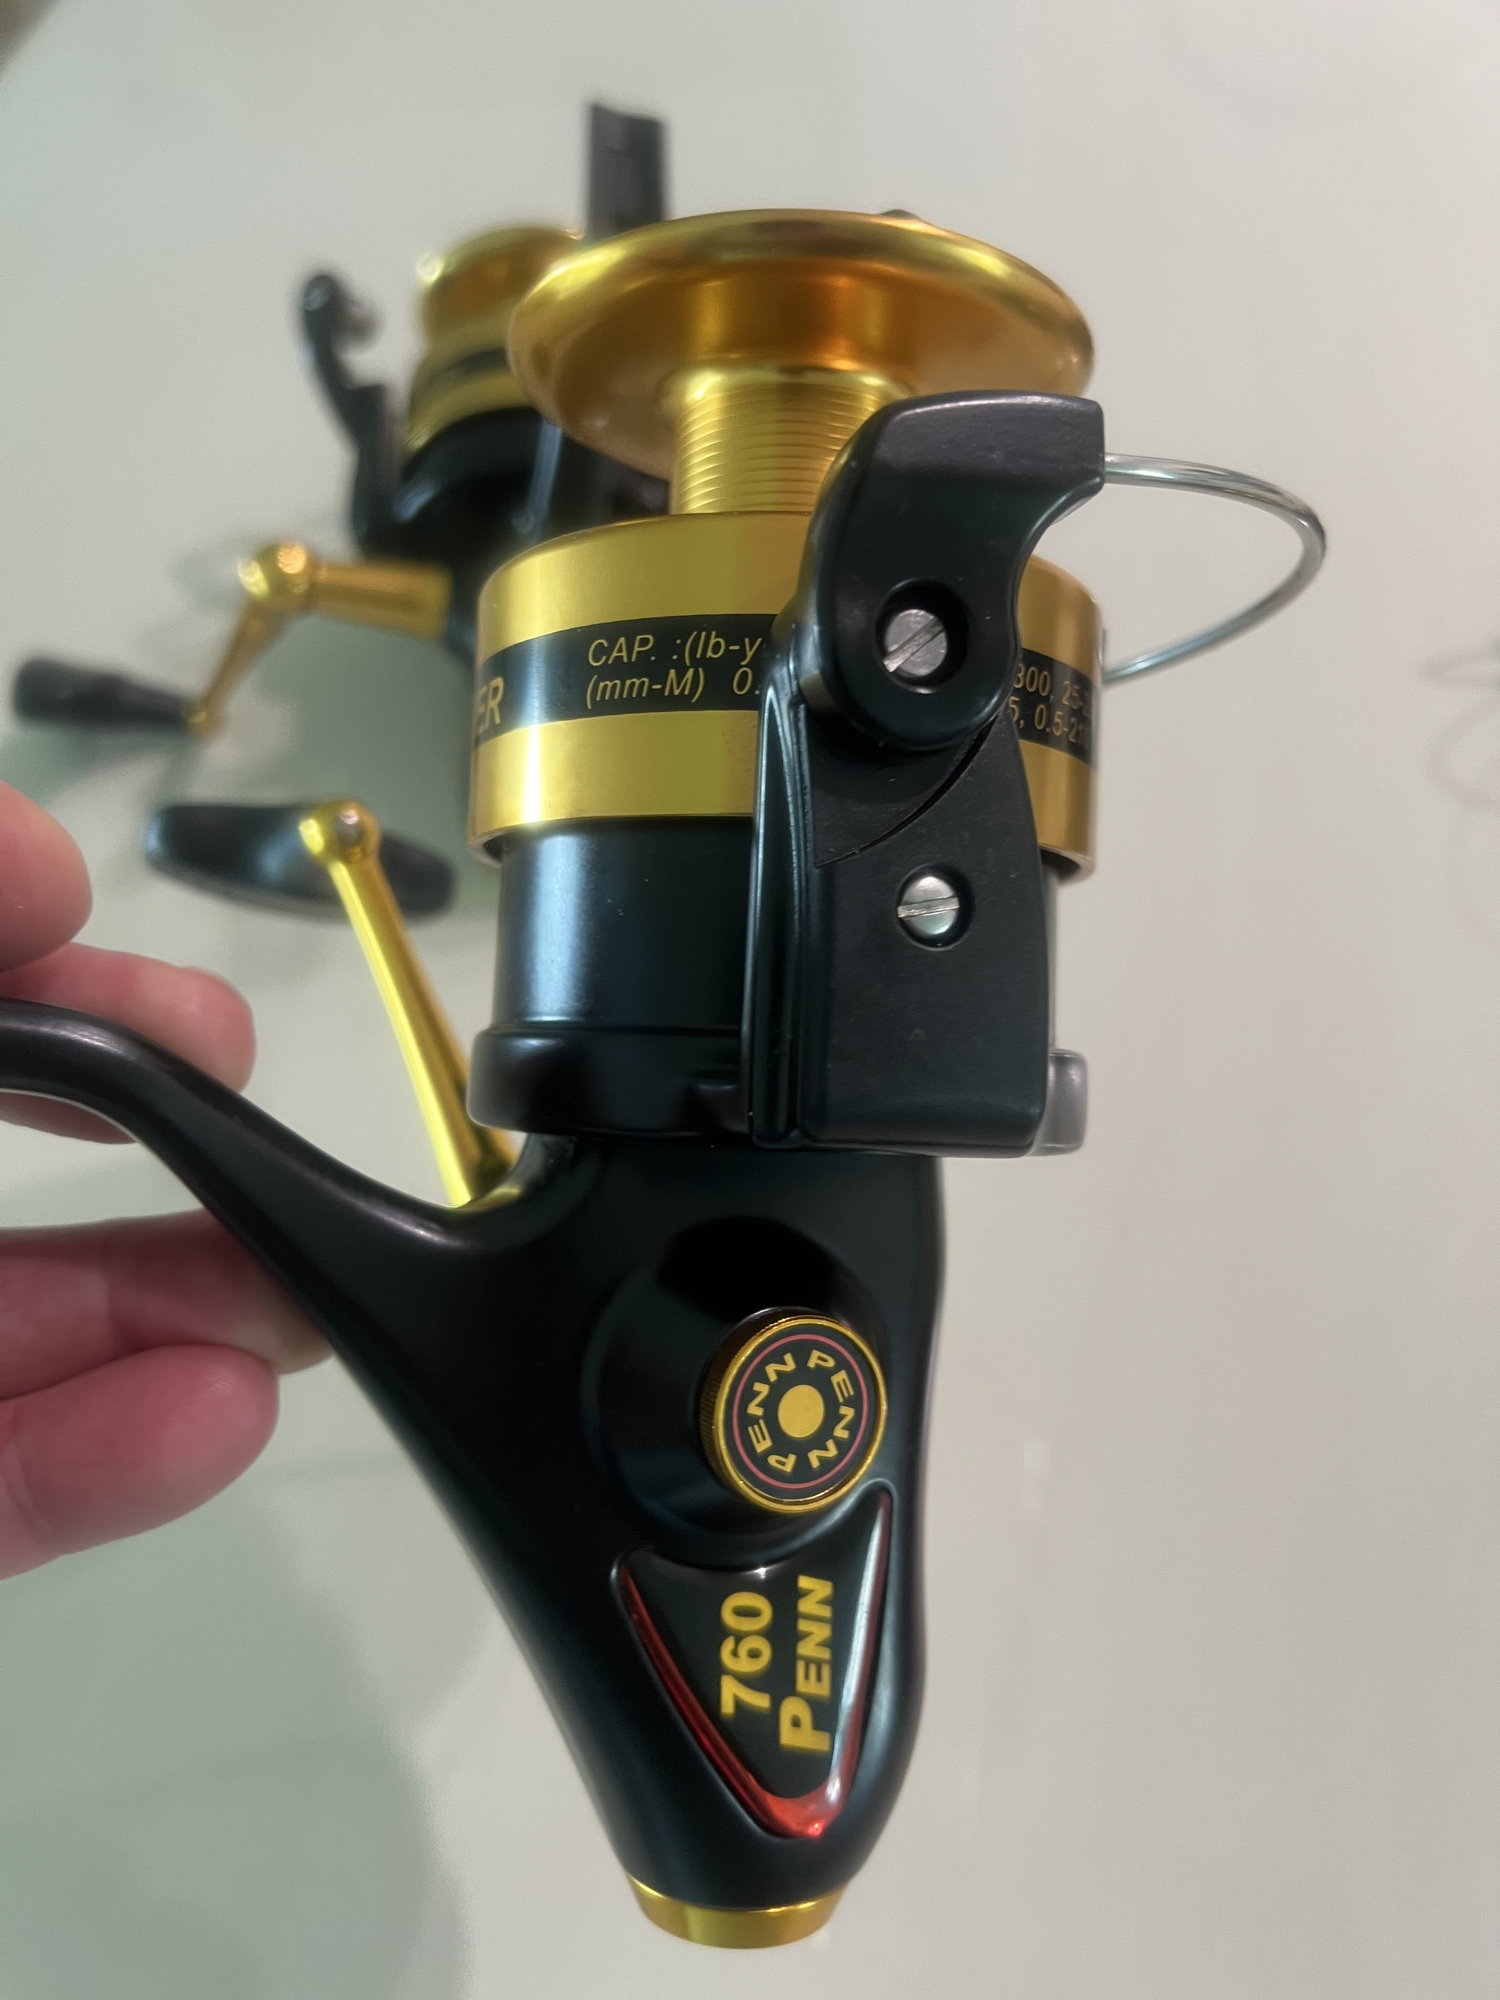 Penn Slammer 760 Spinning Reels. - The Hull Truth - Boating and Fishing  Forum